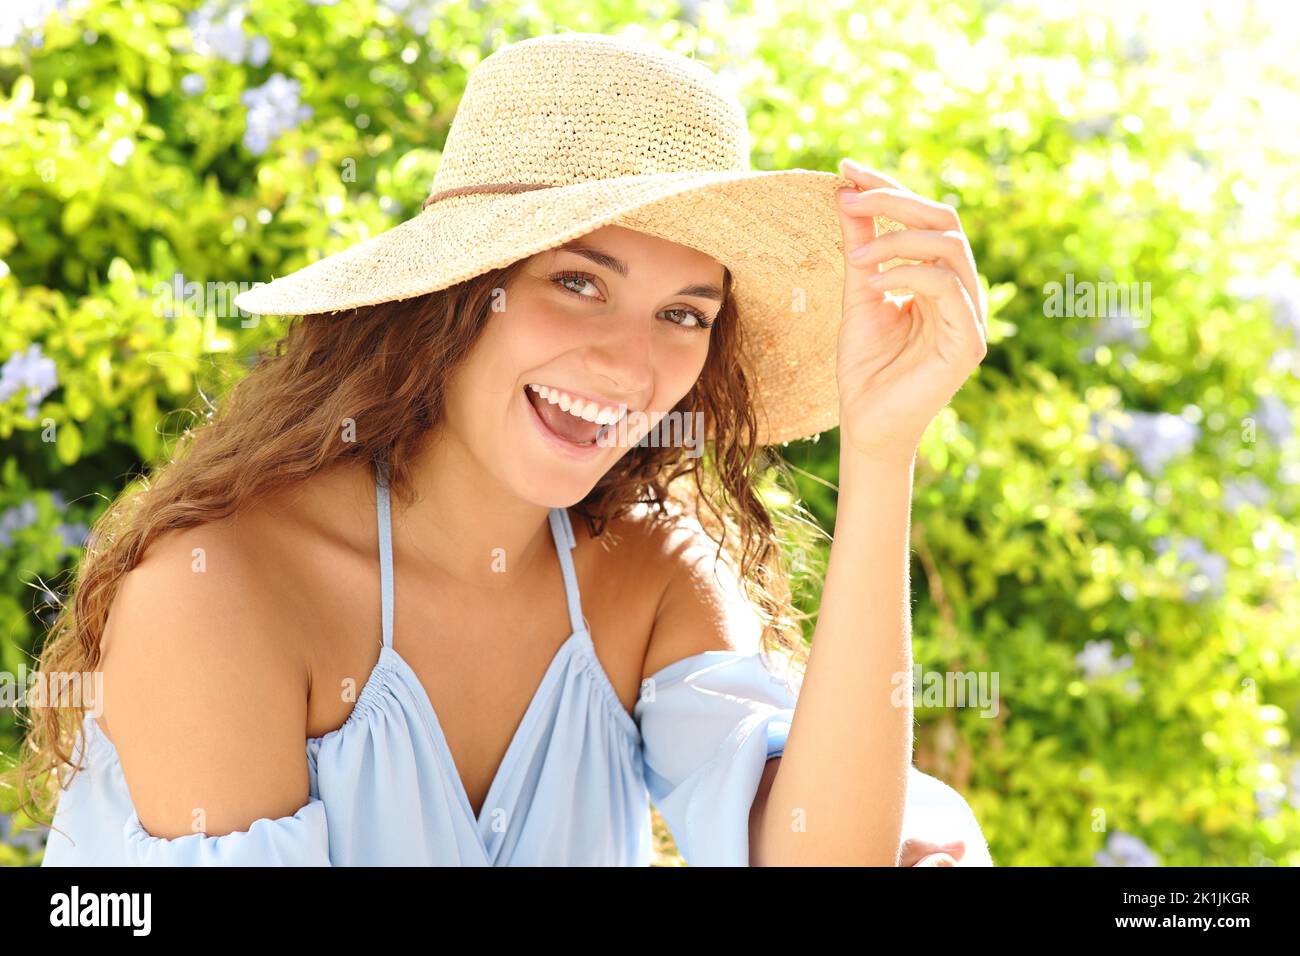 Happy woman with pamela hat looks at you in a green garden Stock Photo